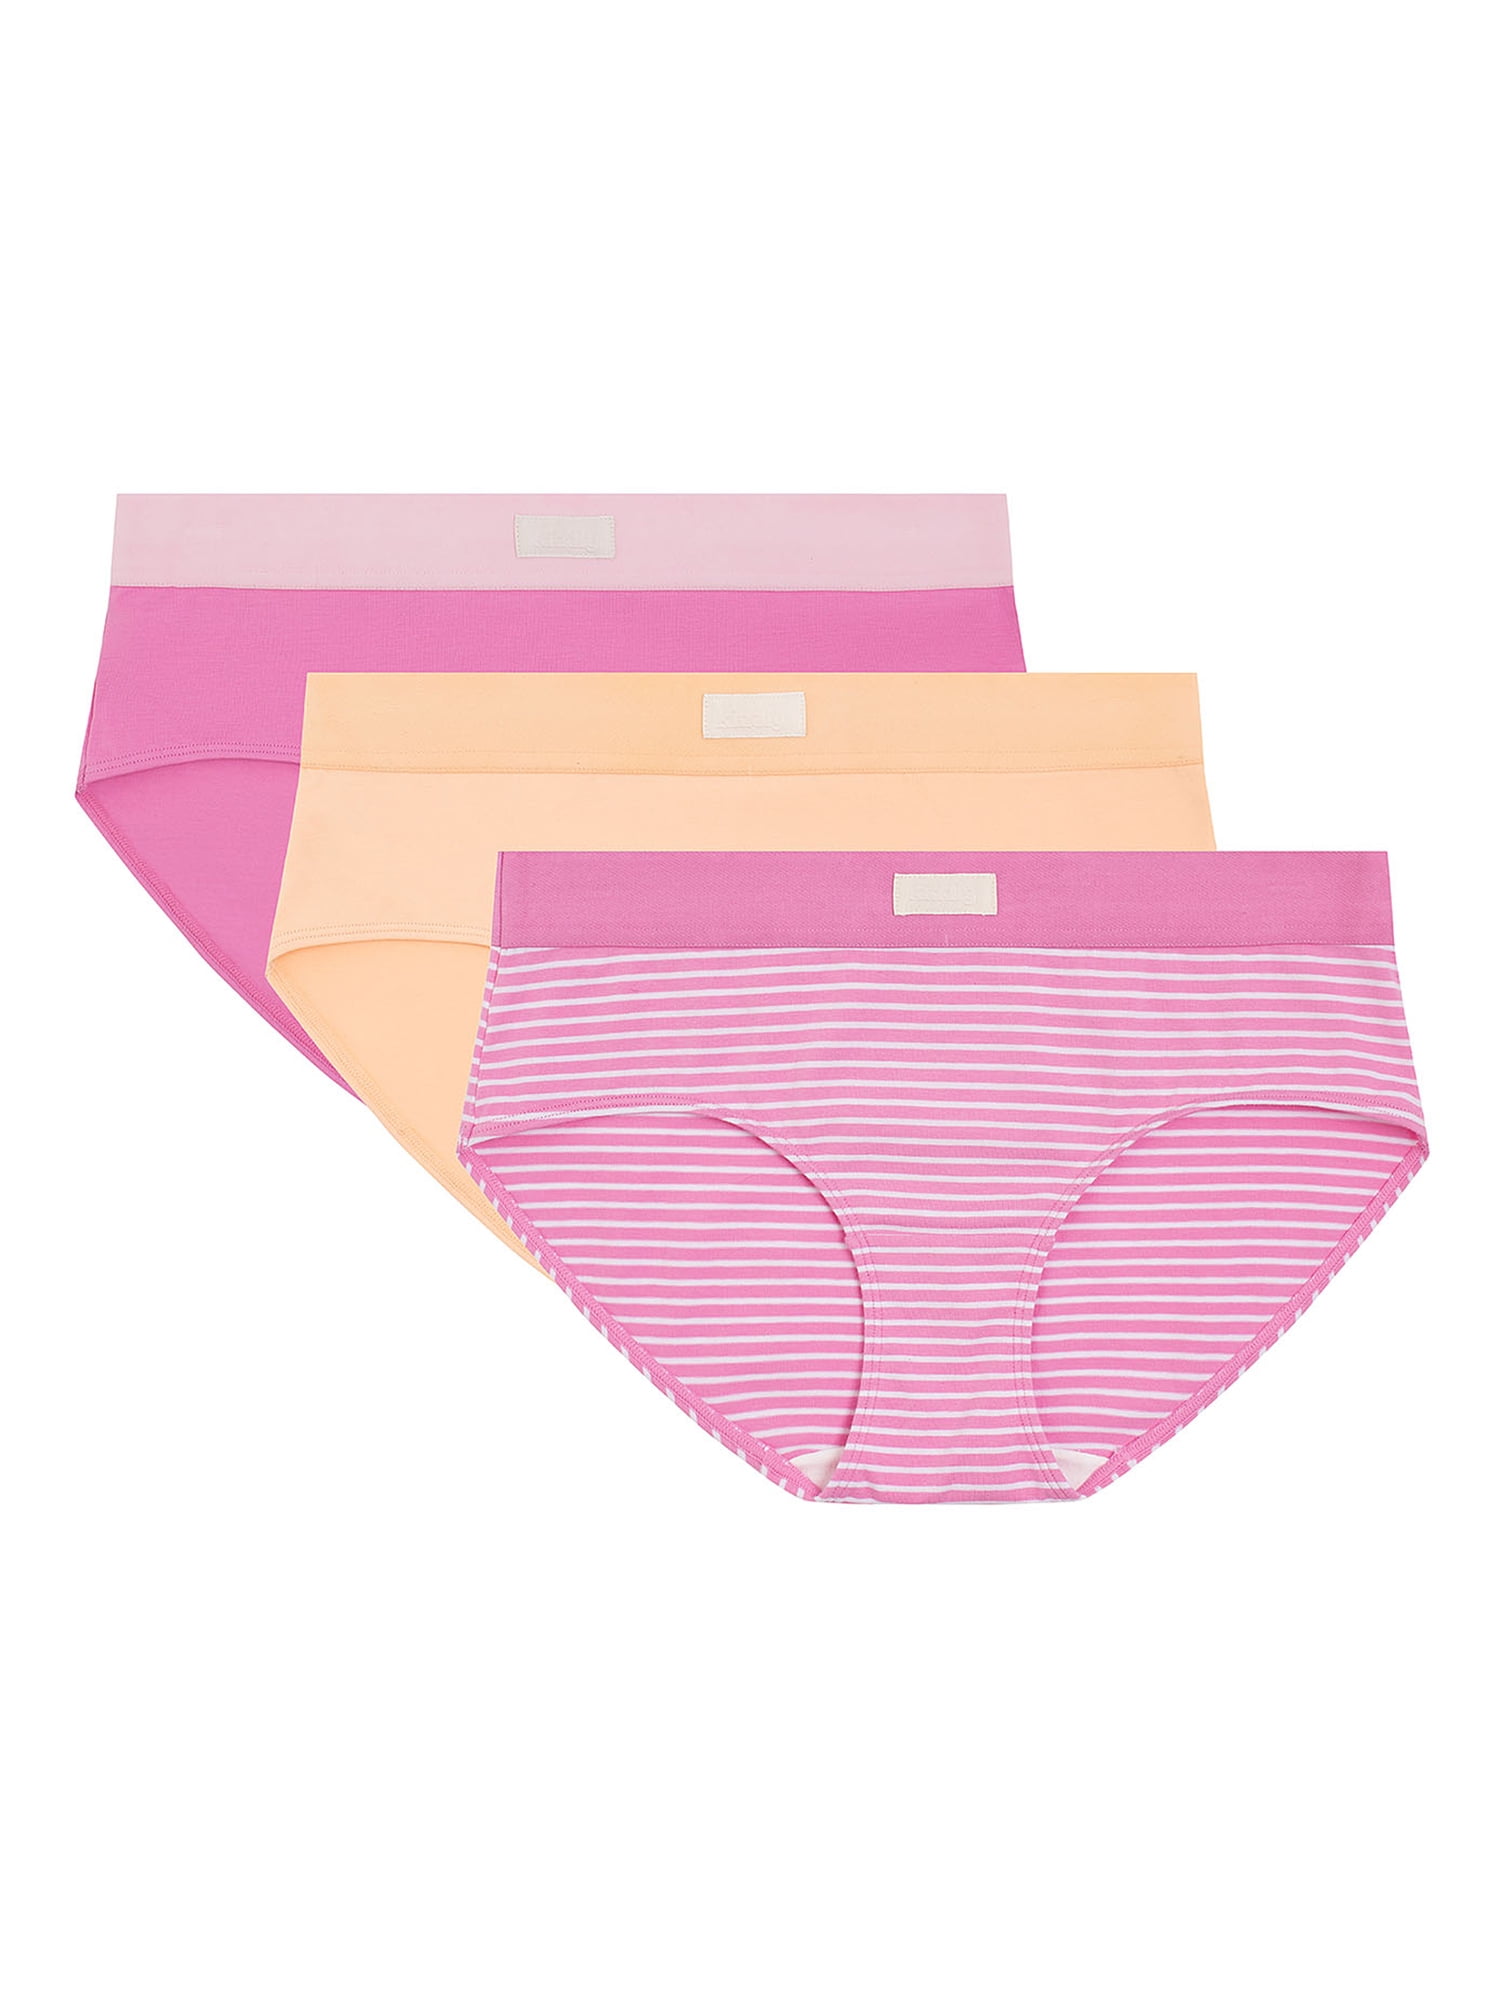 Kindly Yours Women's Cotton Hipster Panties, 3-Pack - Walmart.com